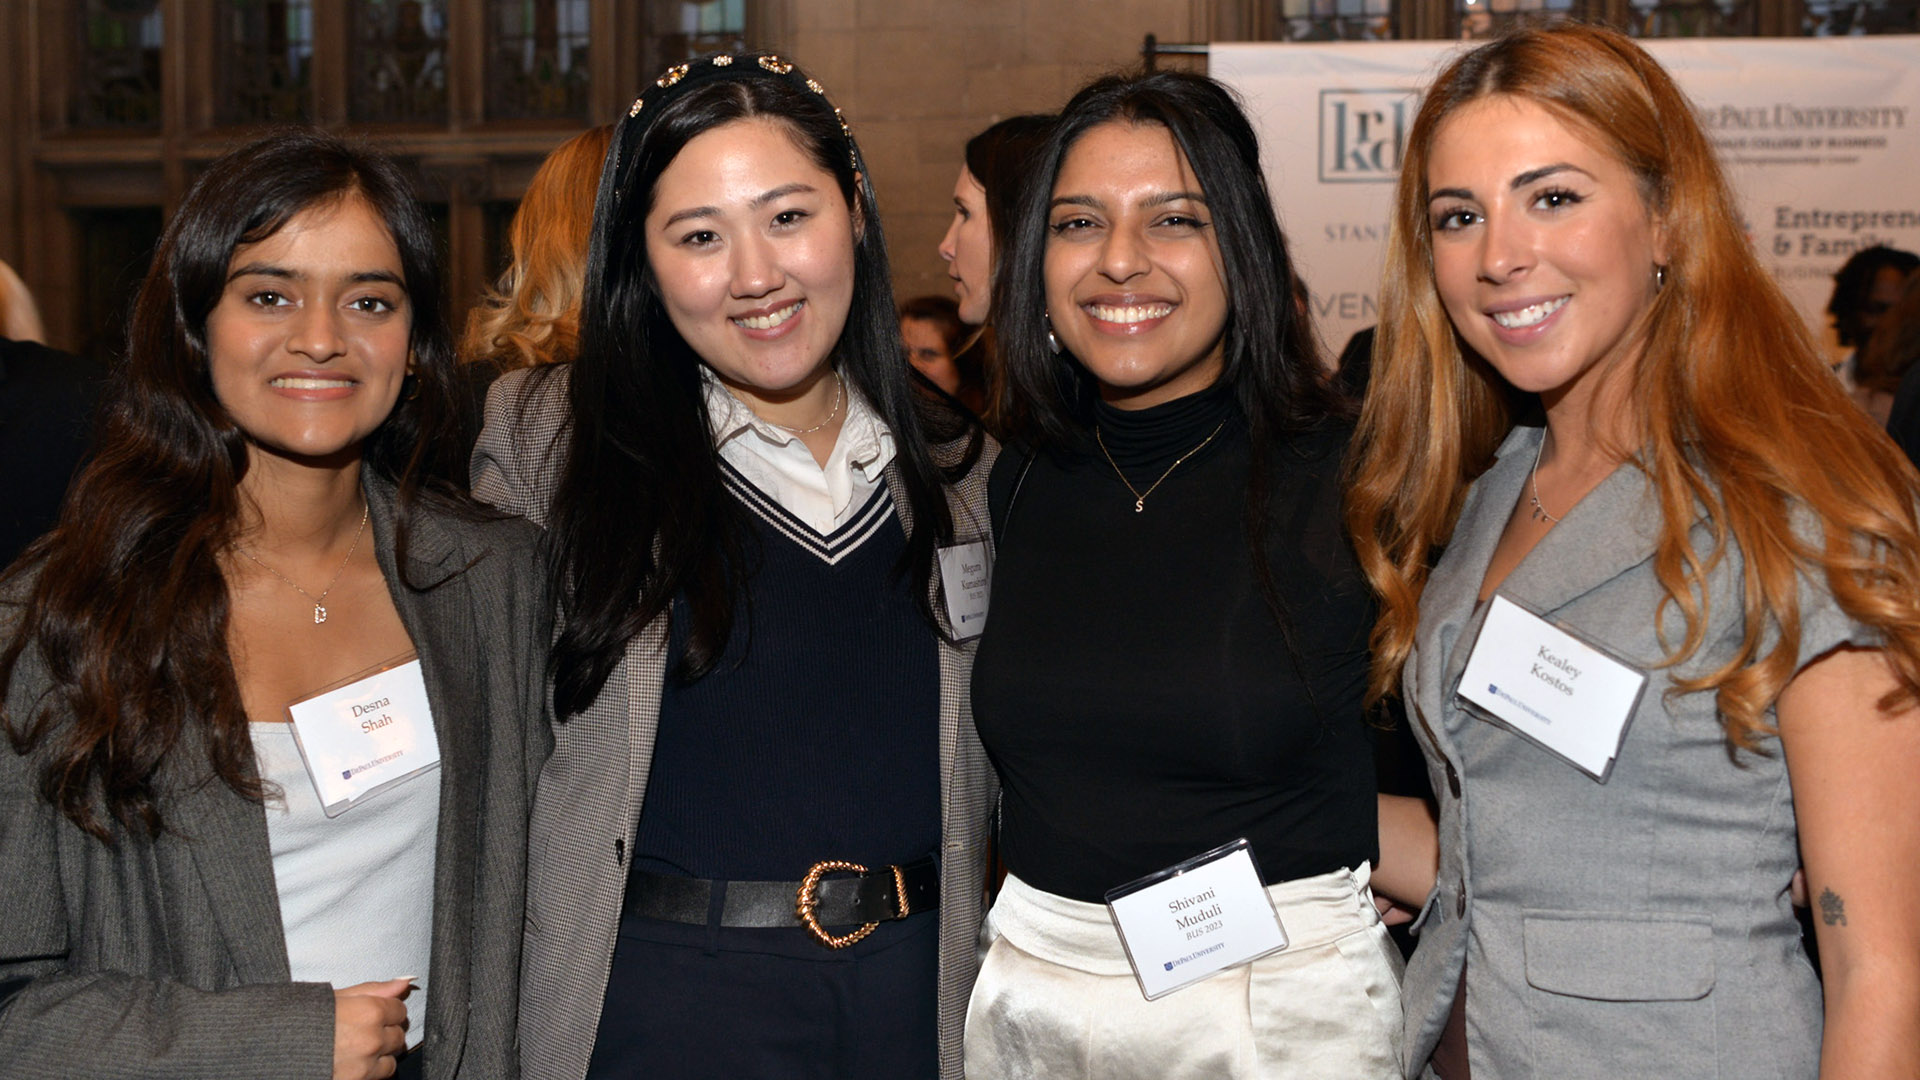 From left to right, current and former student assistants to the CEC: Desna Shah, Megumi Kumashiro, Shivani Muduli; and president of the DePaul chapter of the Collegiate Entrepreneur Organization Kealey Kostos.